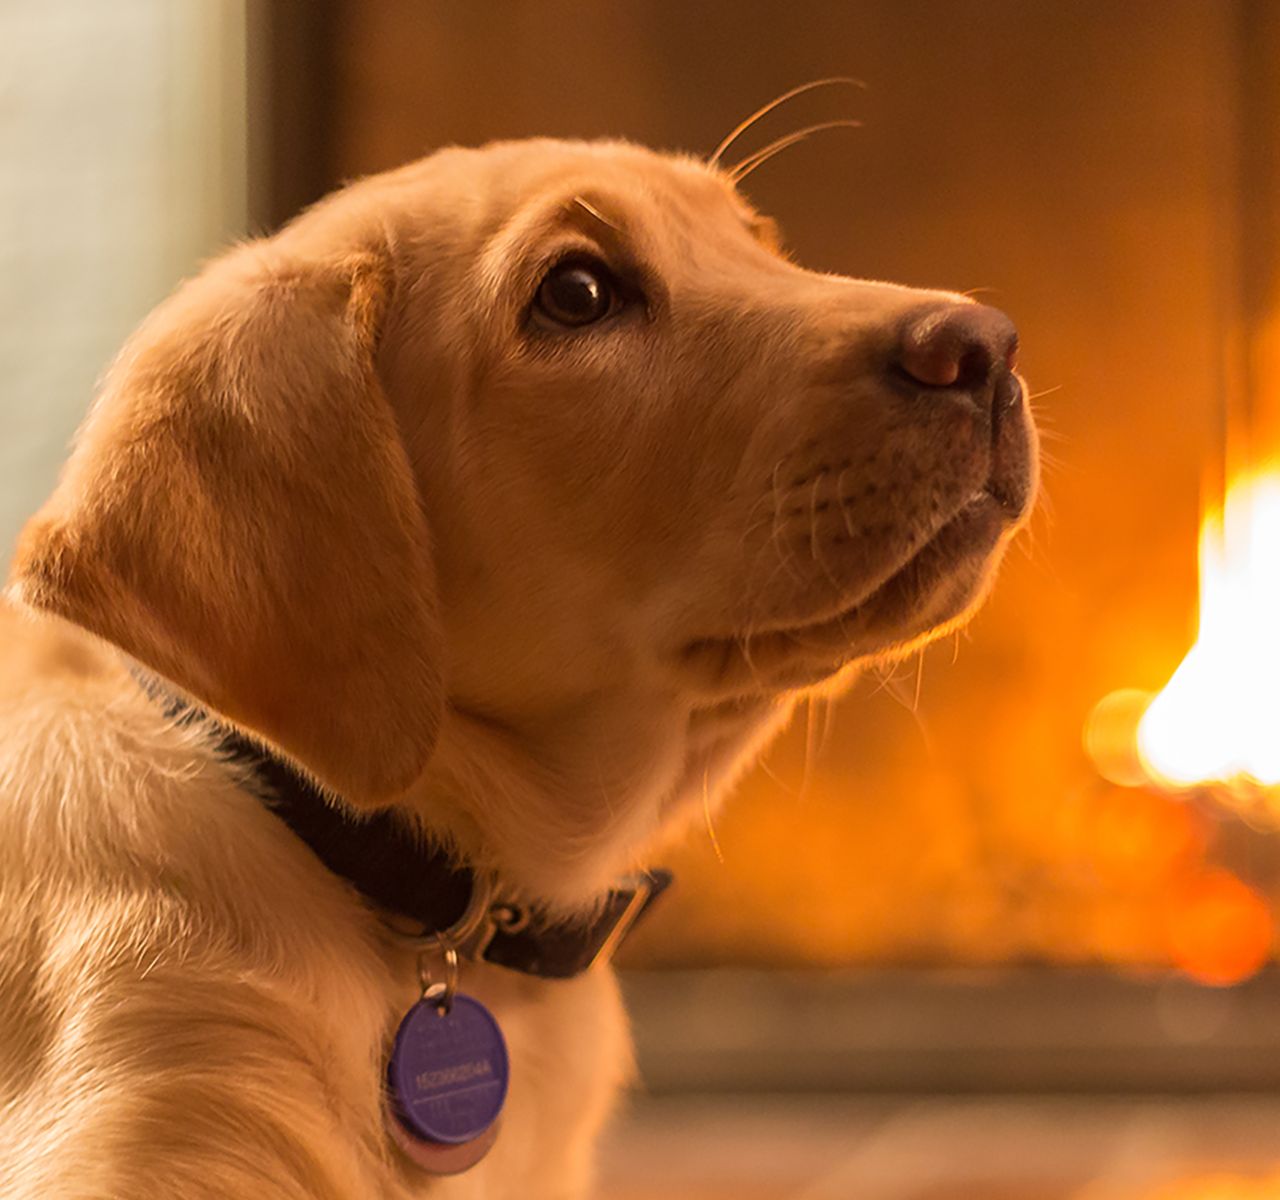 Pet Wildfire Safety: Tips for Protecting Your Pet During a Wildfire